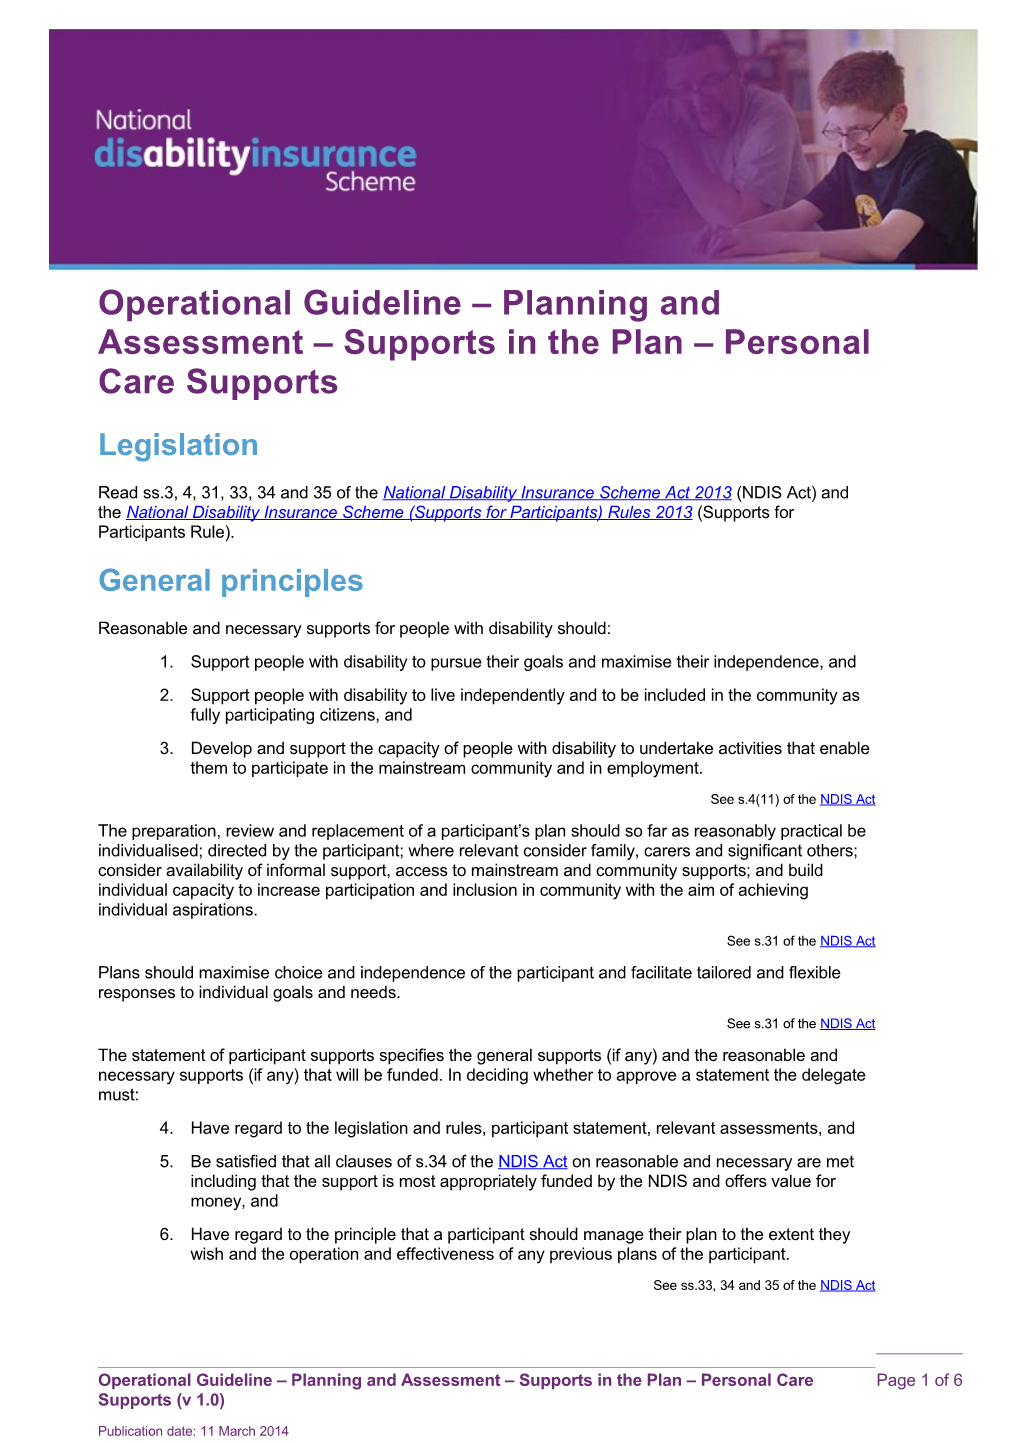 Operational Guideline Planning and Assessment Supports in the Plan Personal Care Supports